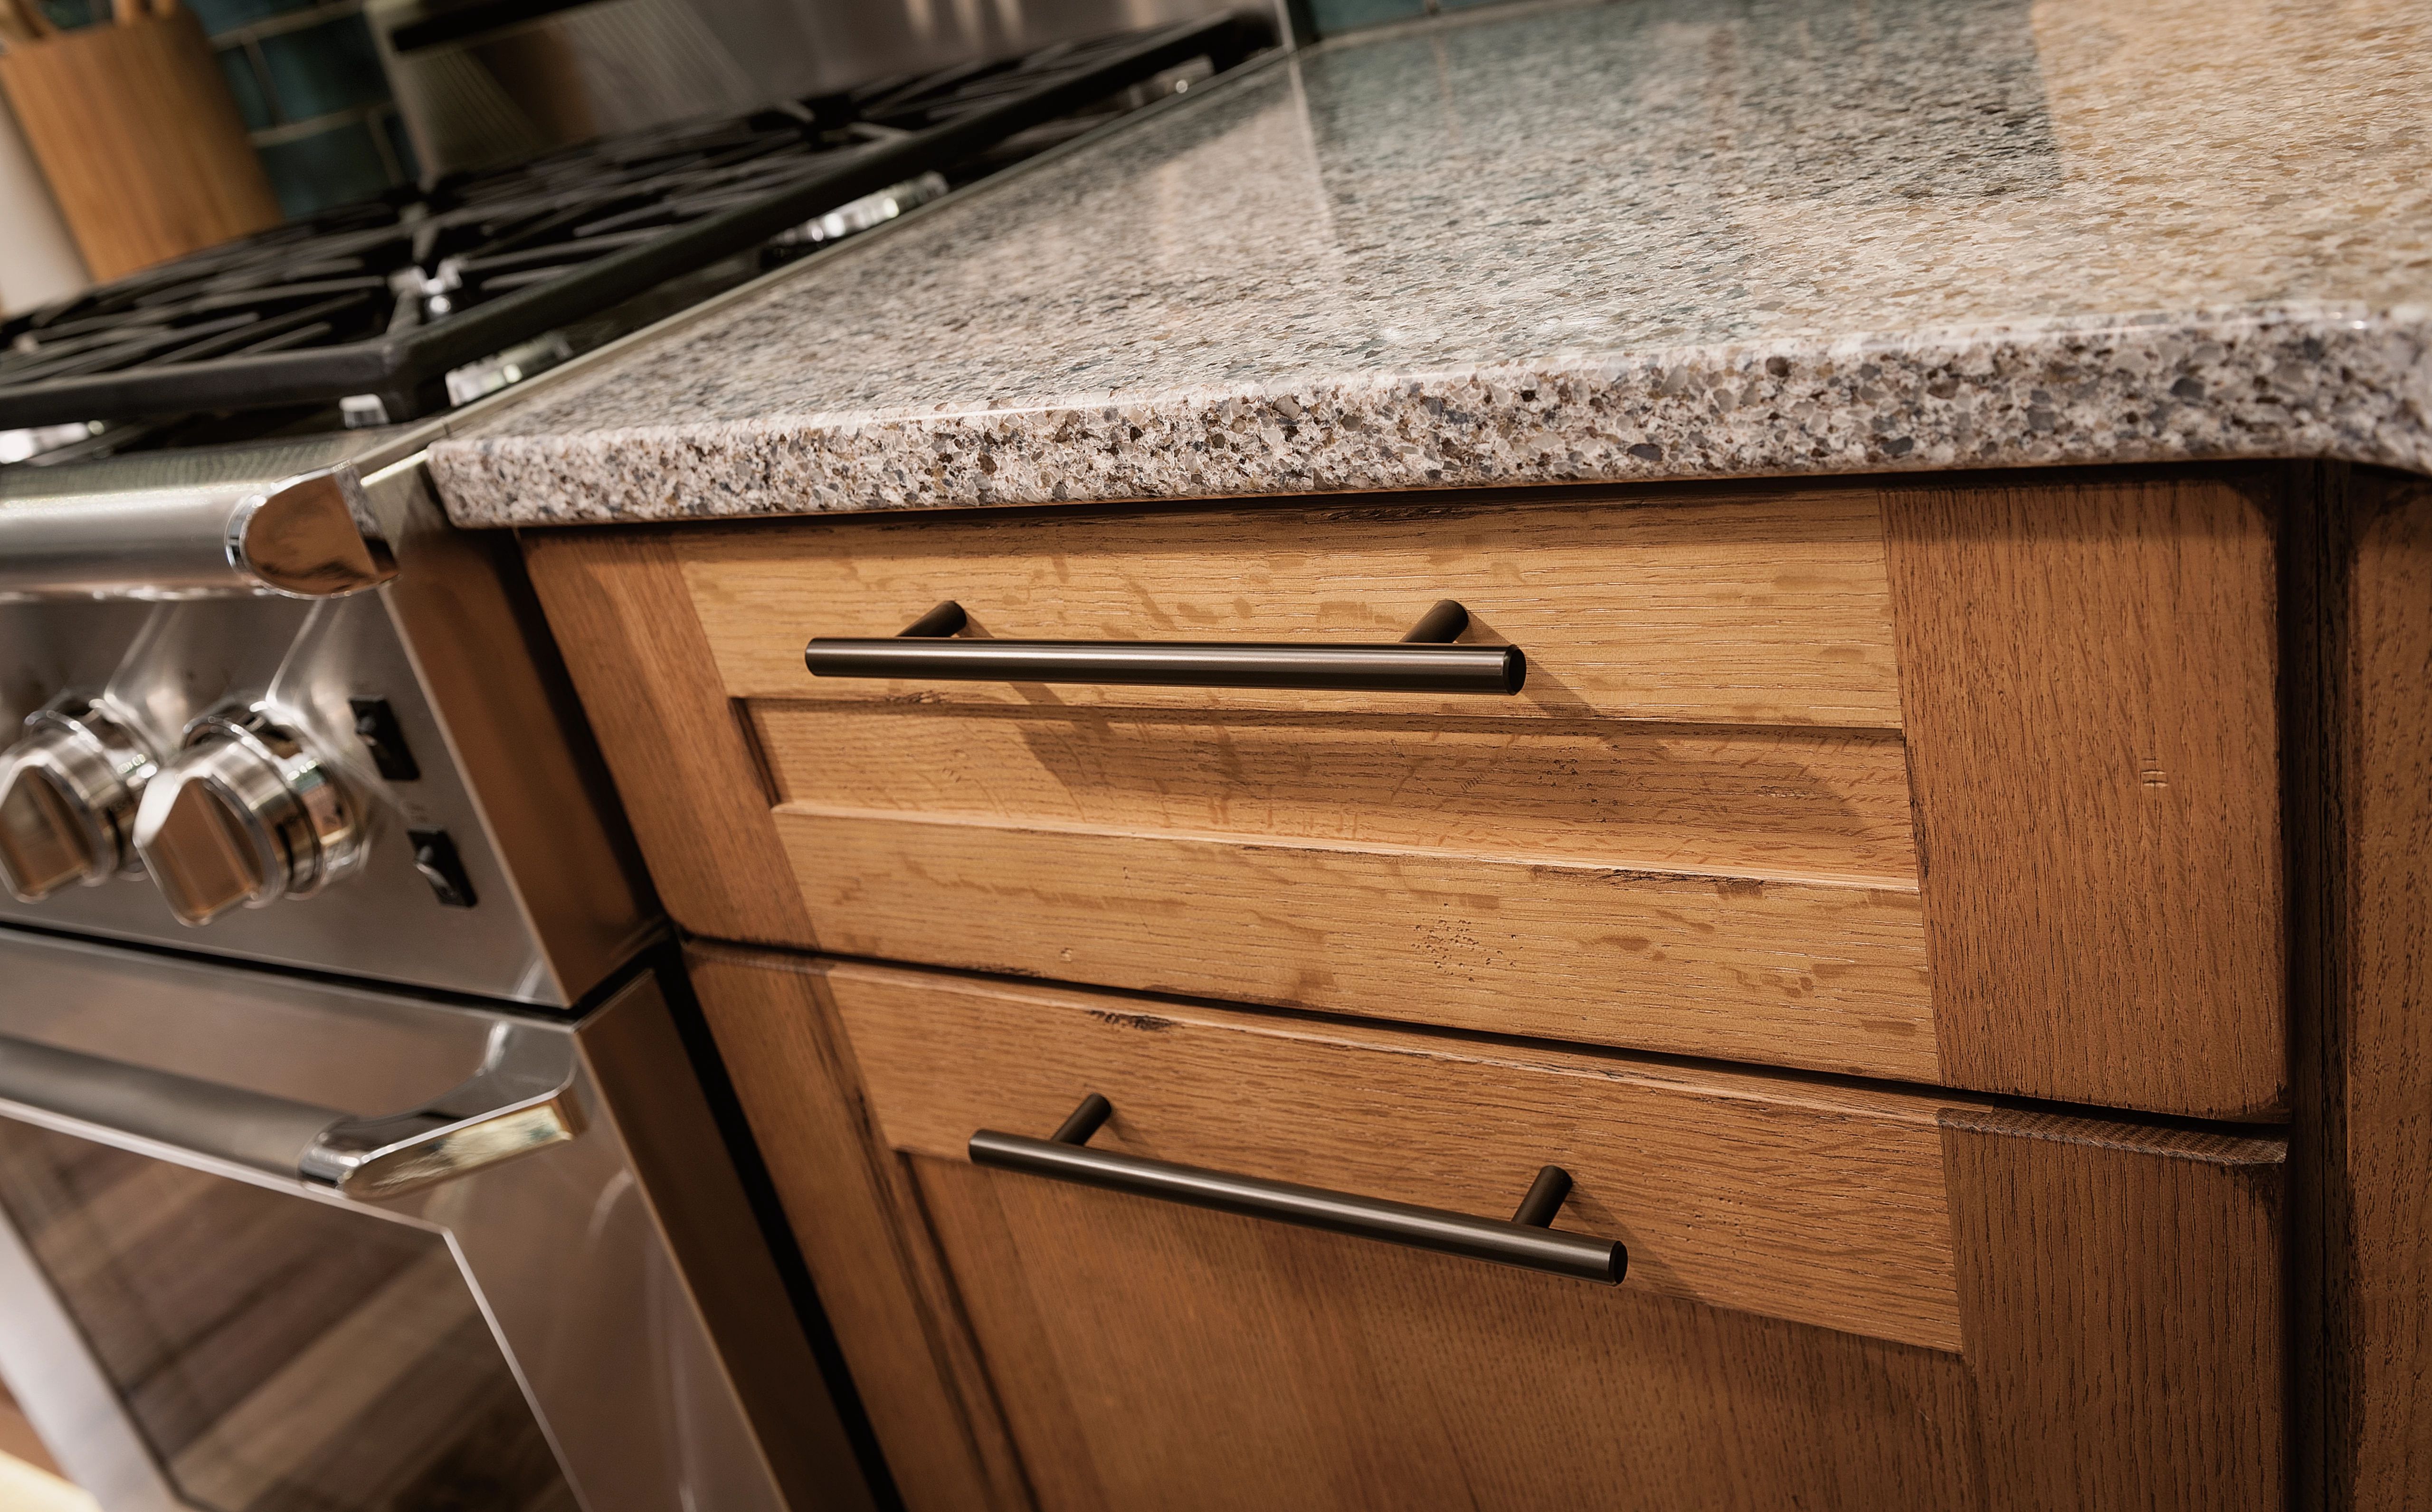 Oversized pulls with a Modern placement give cabinets a contemporary appearance.